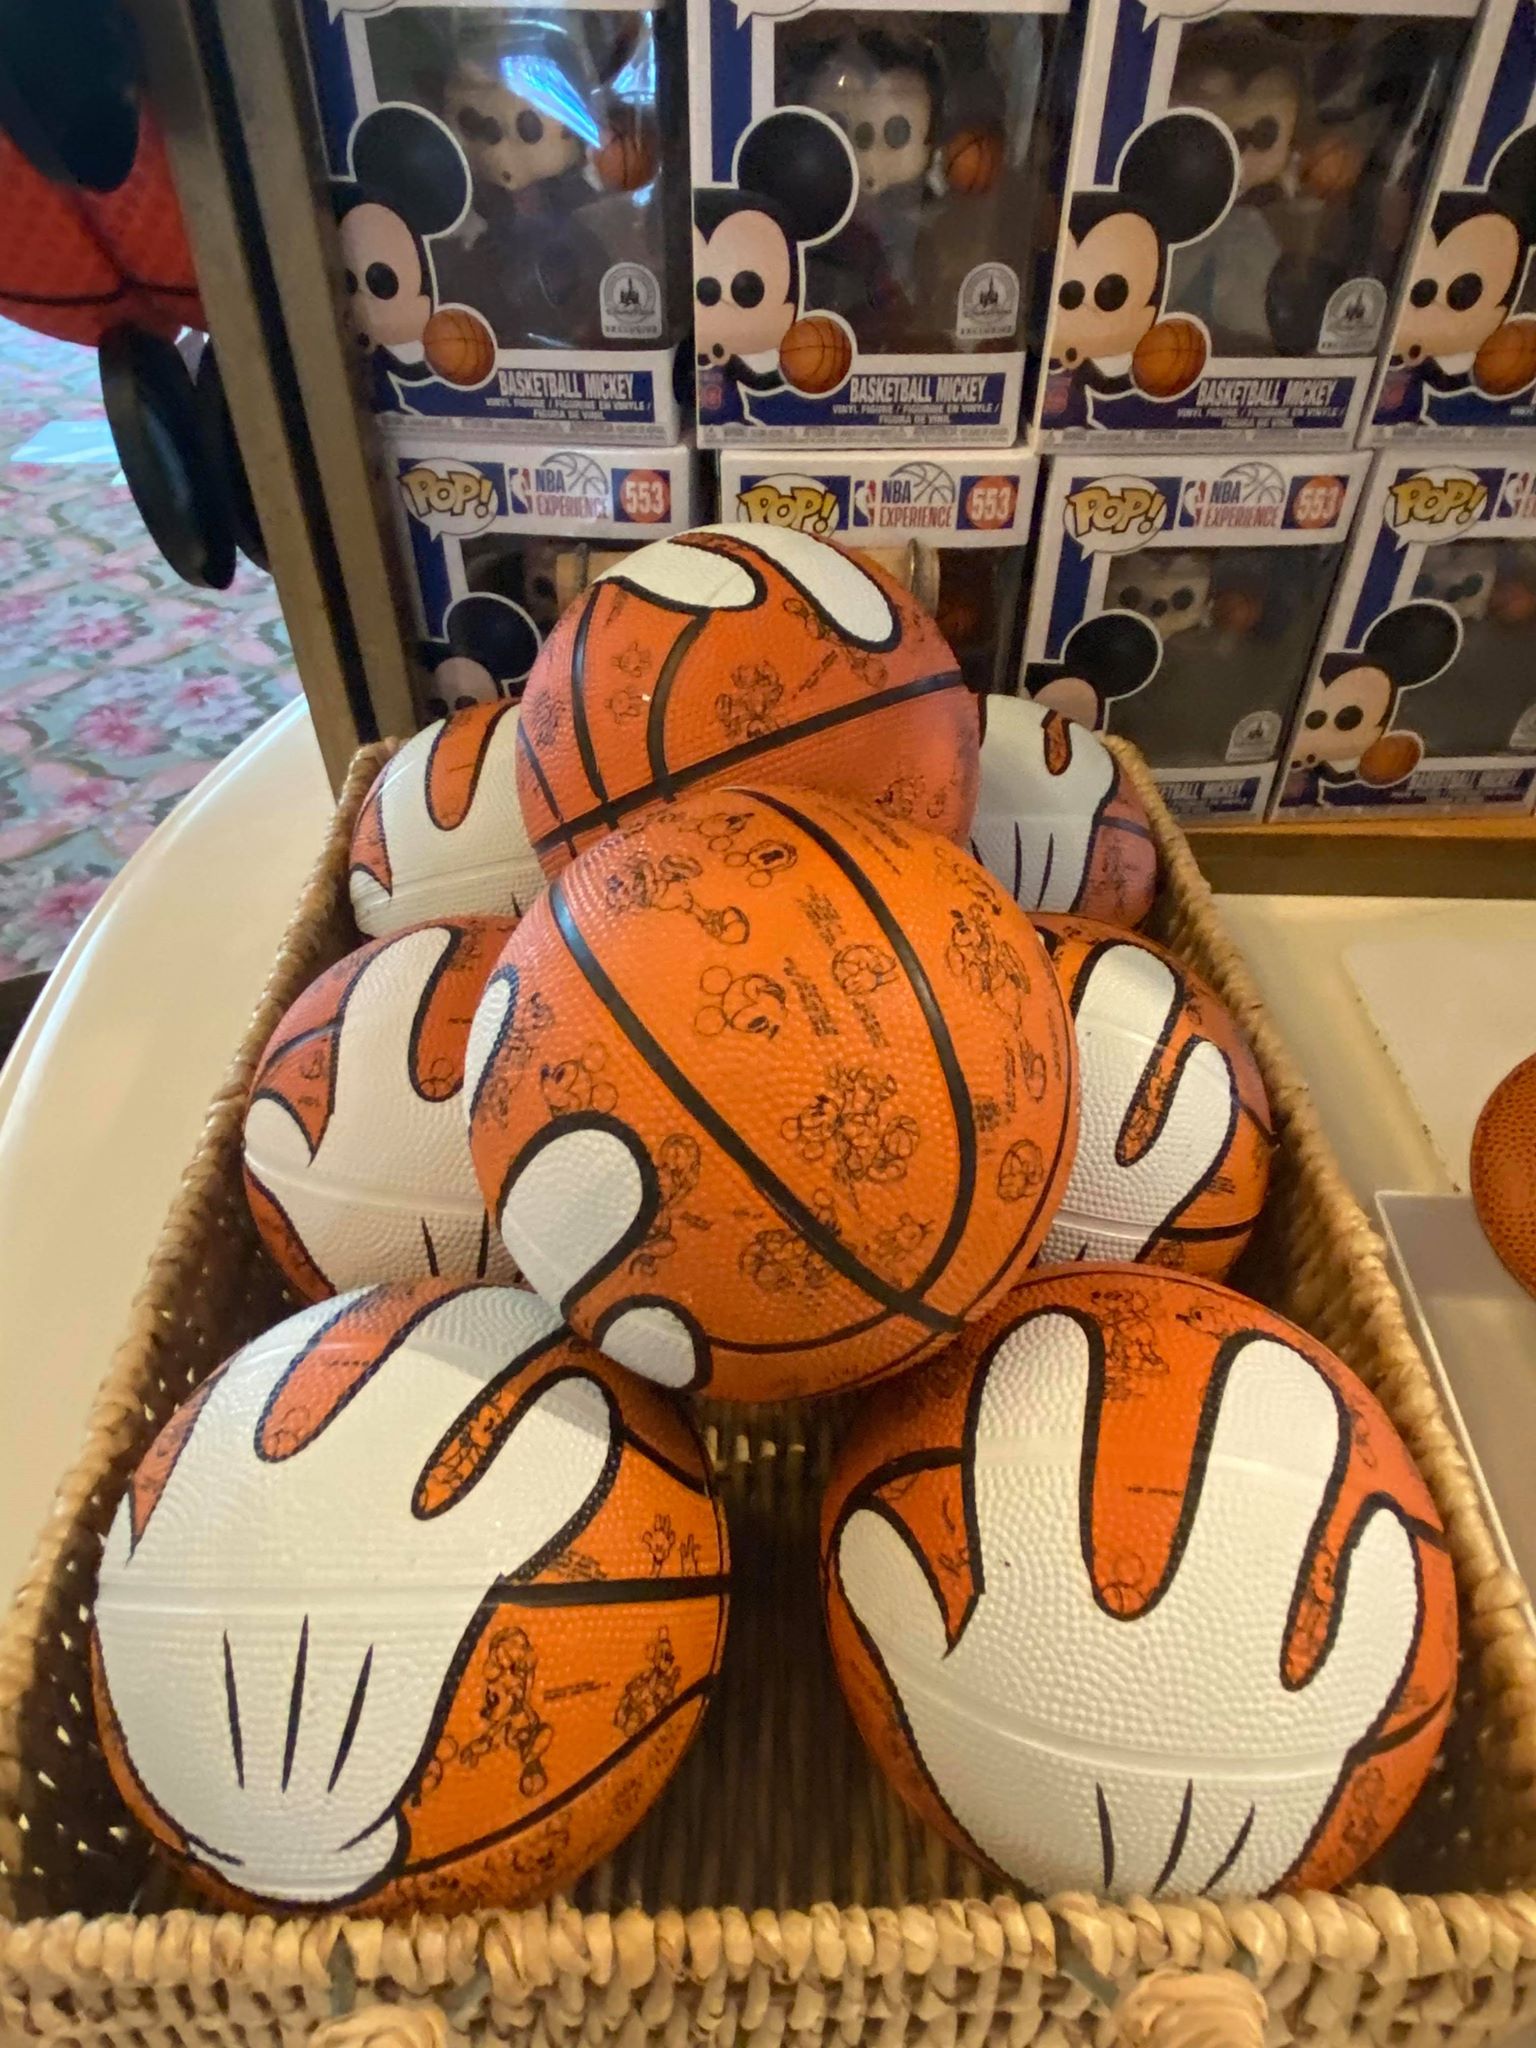 Looking for NBA-Themed Disney Merchandise?! TONS of Options Are